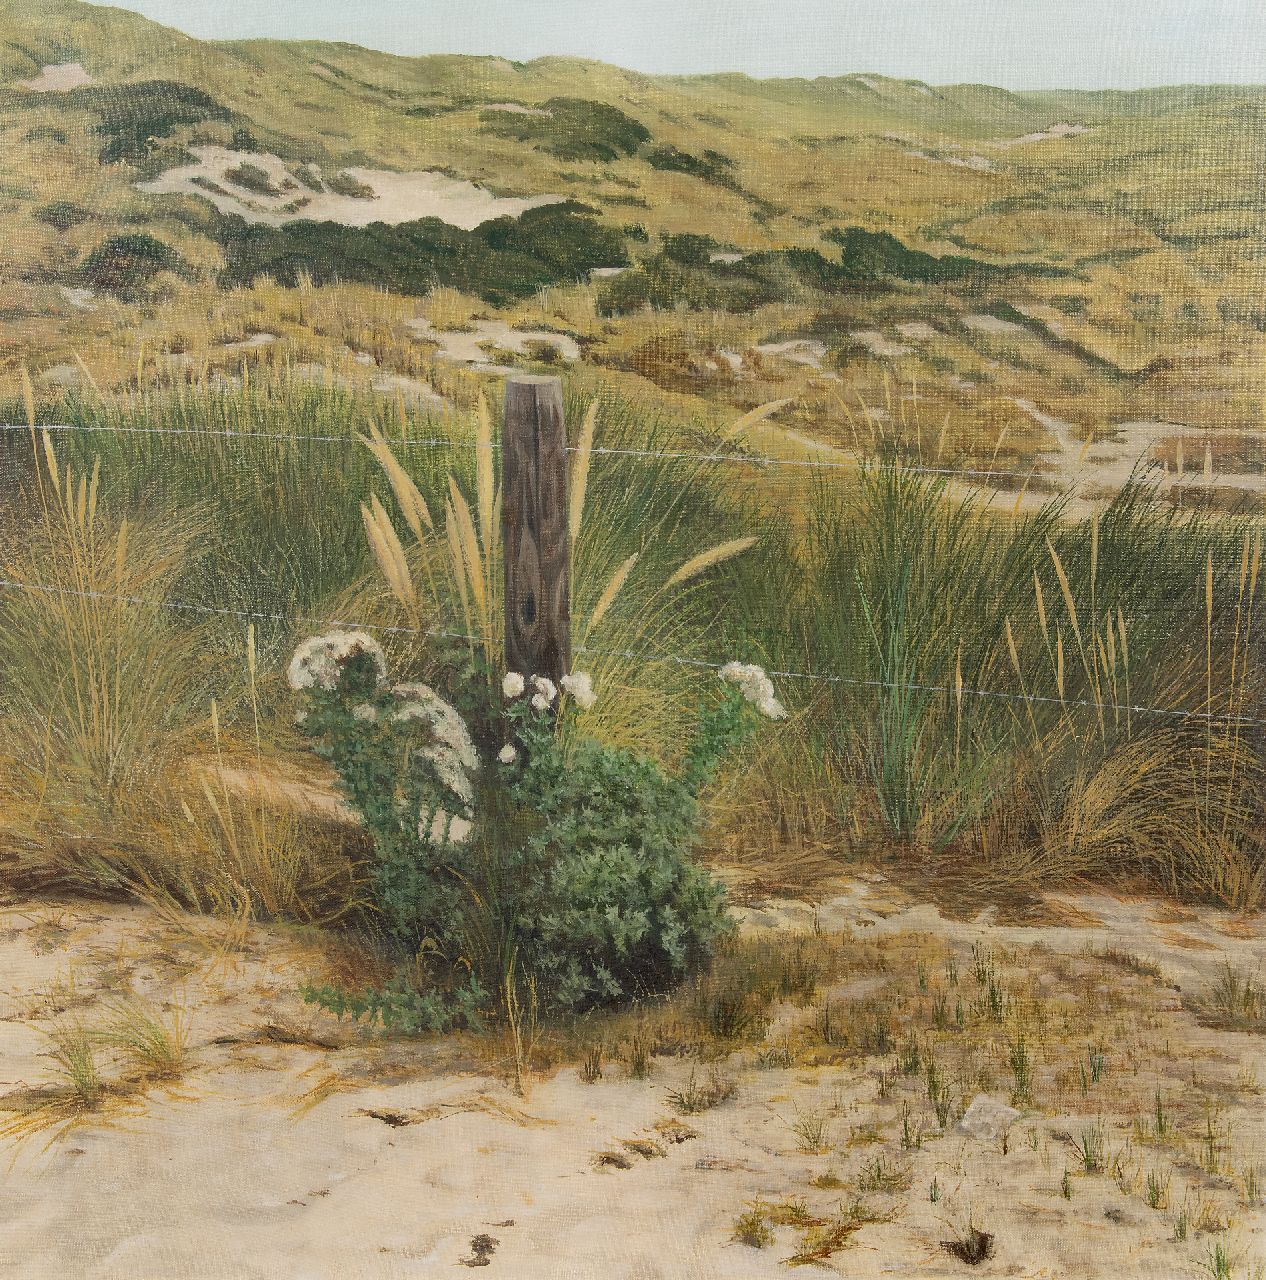 Loo P. van | Pieter 'Pit' van Loo | Paintings offered for sale | Still life in the dunes (Terschelling), oil on canvas 80.1 x 80.4 cm, signed l.r. on paper in the beach grass and dated '75